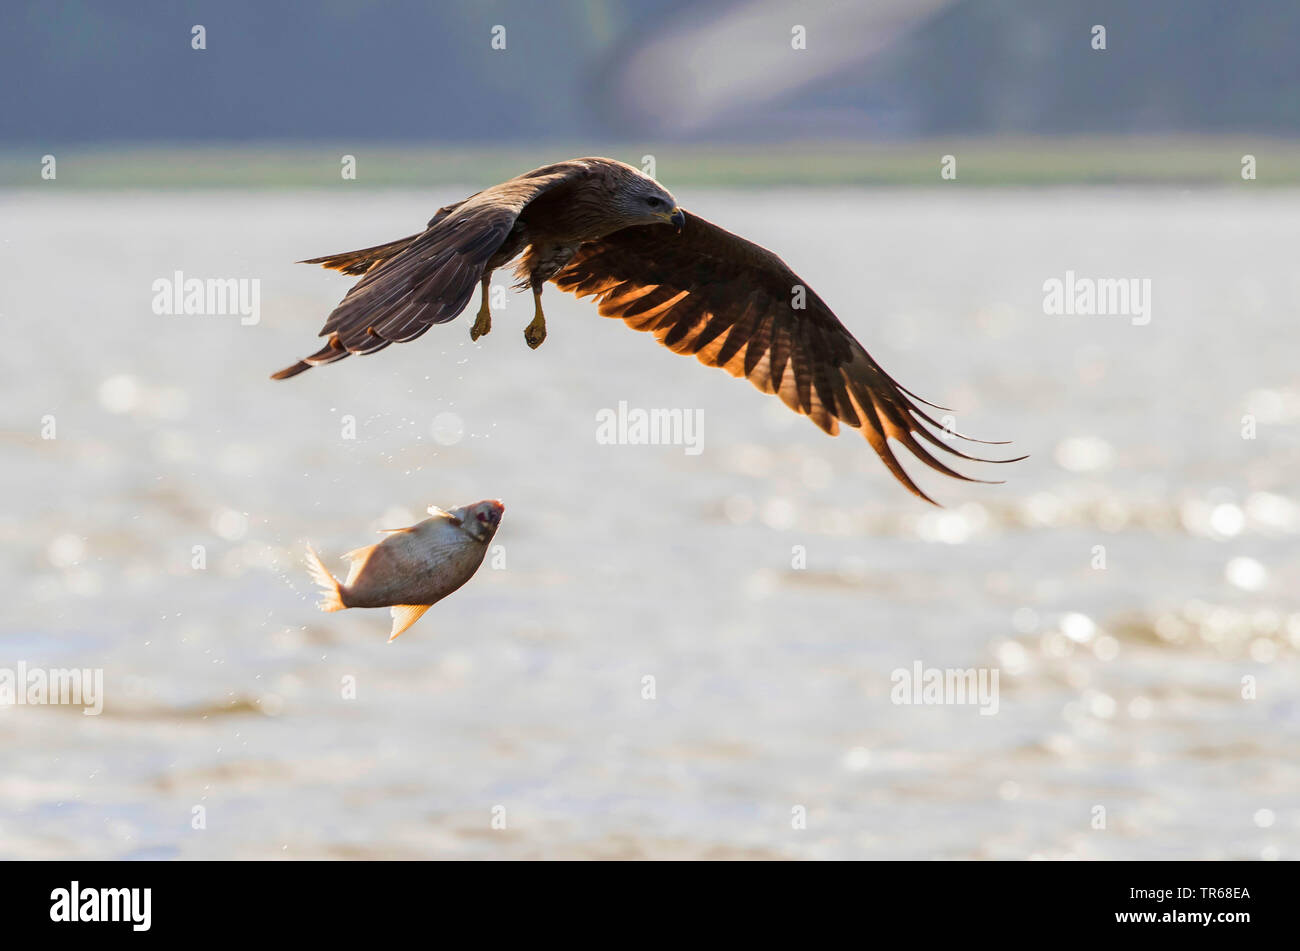 Black kite, Yellow-billed kite (Milvus migrans), in flight over a lake, dropping a heavy fish, Germany, Mecklenburg-Western Pomerania, Malchiner See Stock Photo